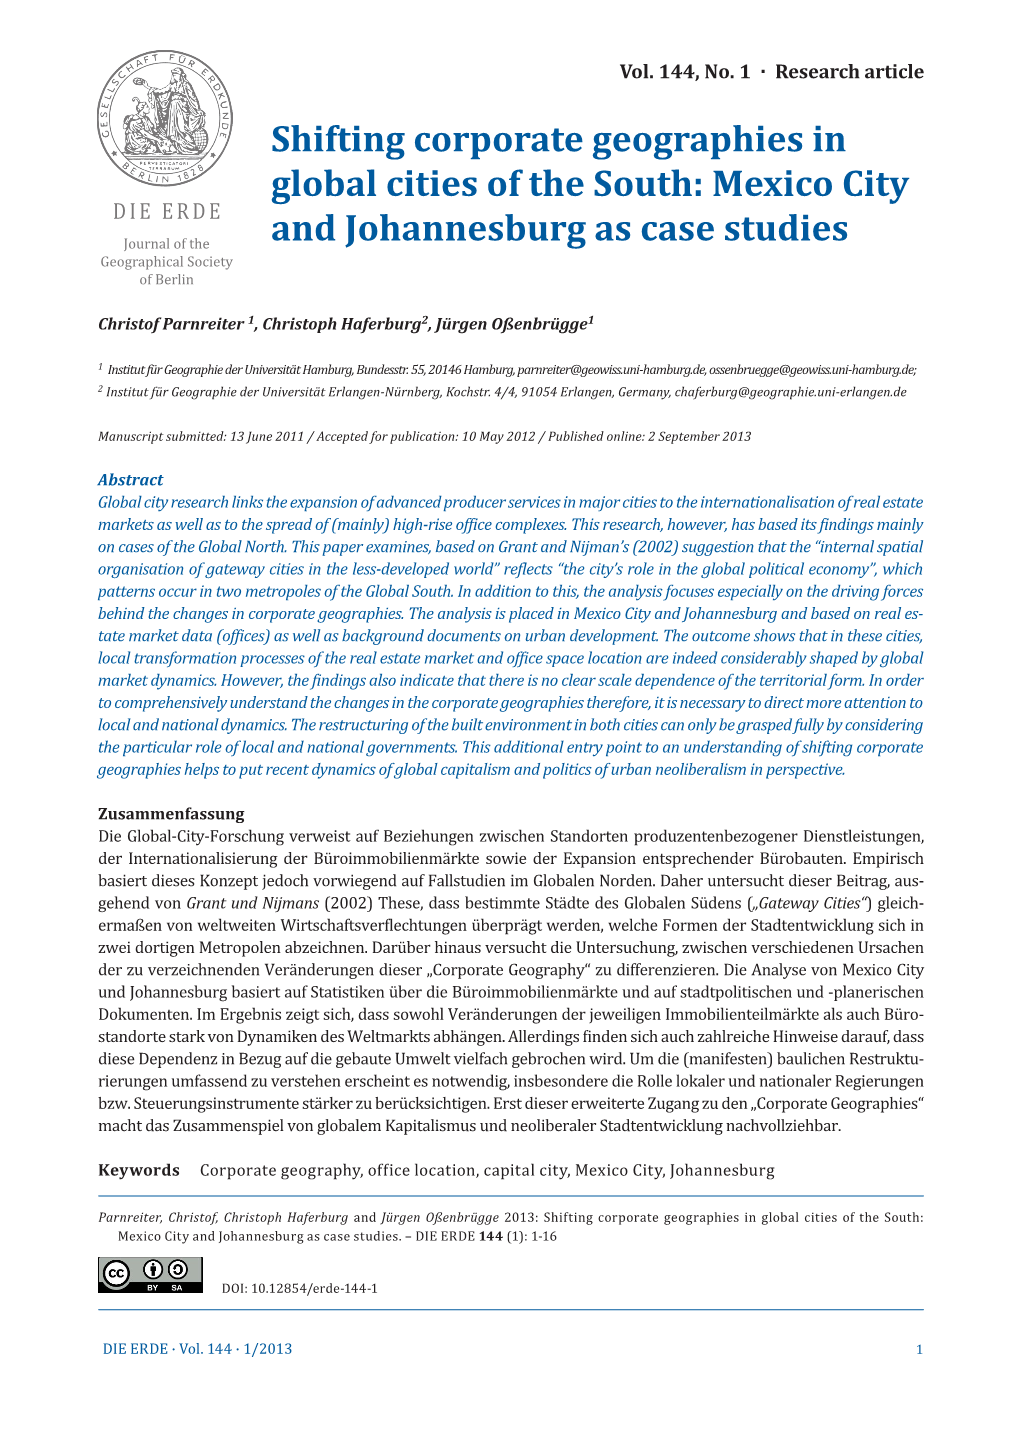 Shifting Corporate Geographies in Global Cities of the South: Mexico City DIE ERDE Journal of the and Johannesburg As Case Studies Geographical Society of Berlin